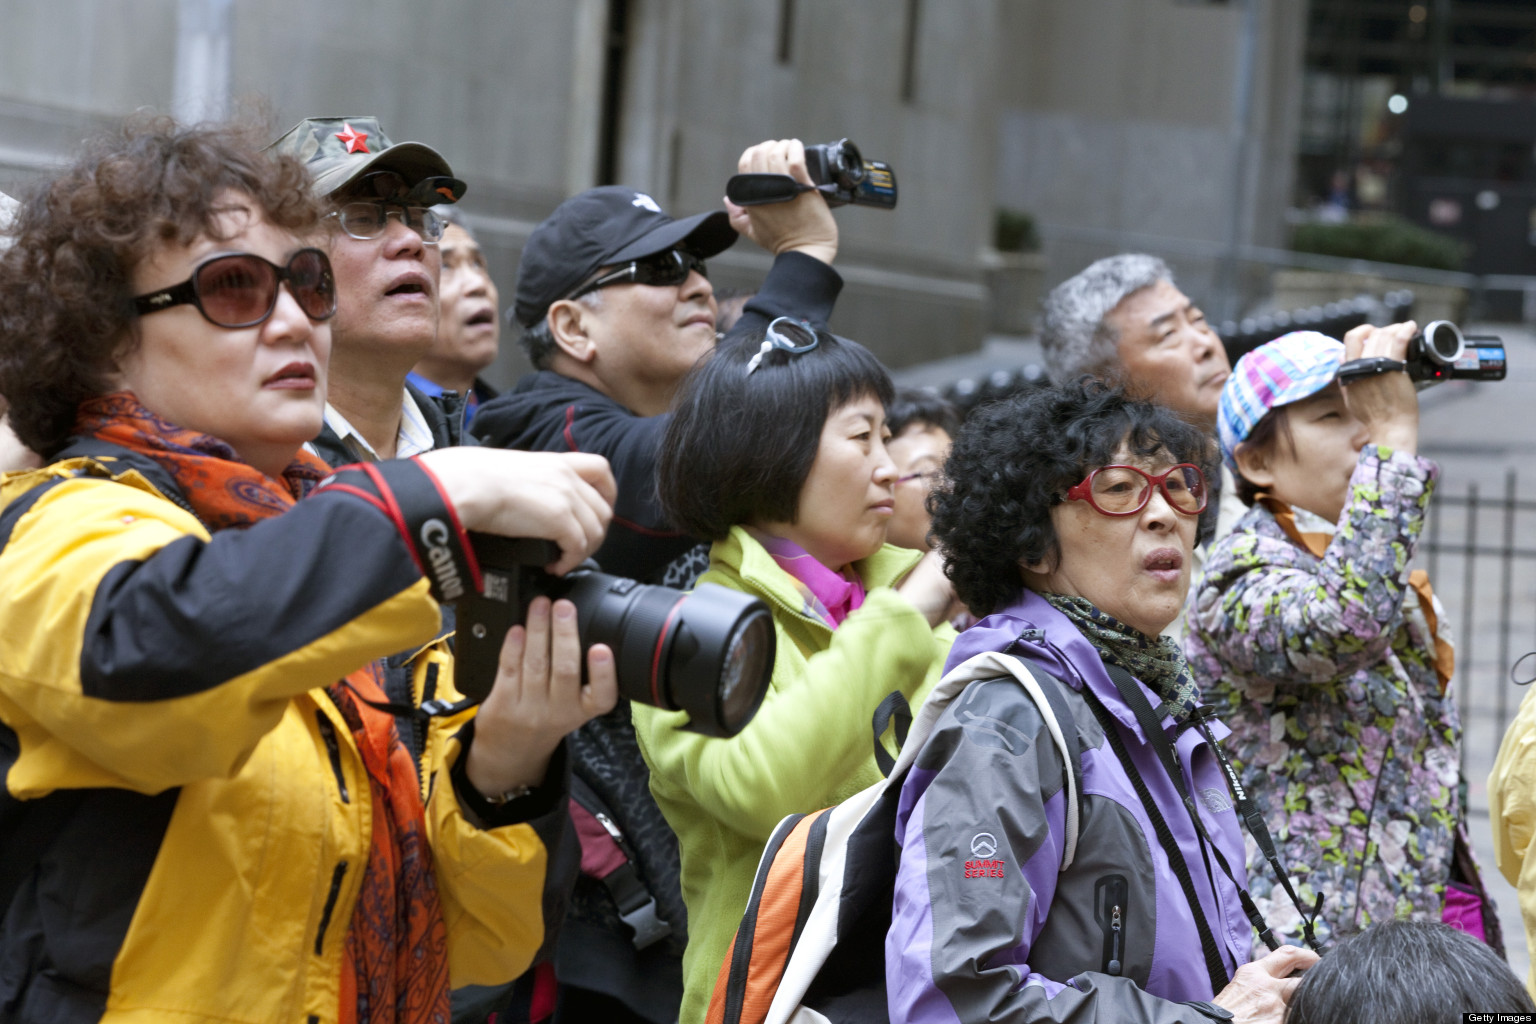 Chinese Tourists The Focus Of International Scrutiny After ...